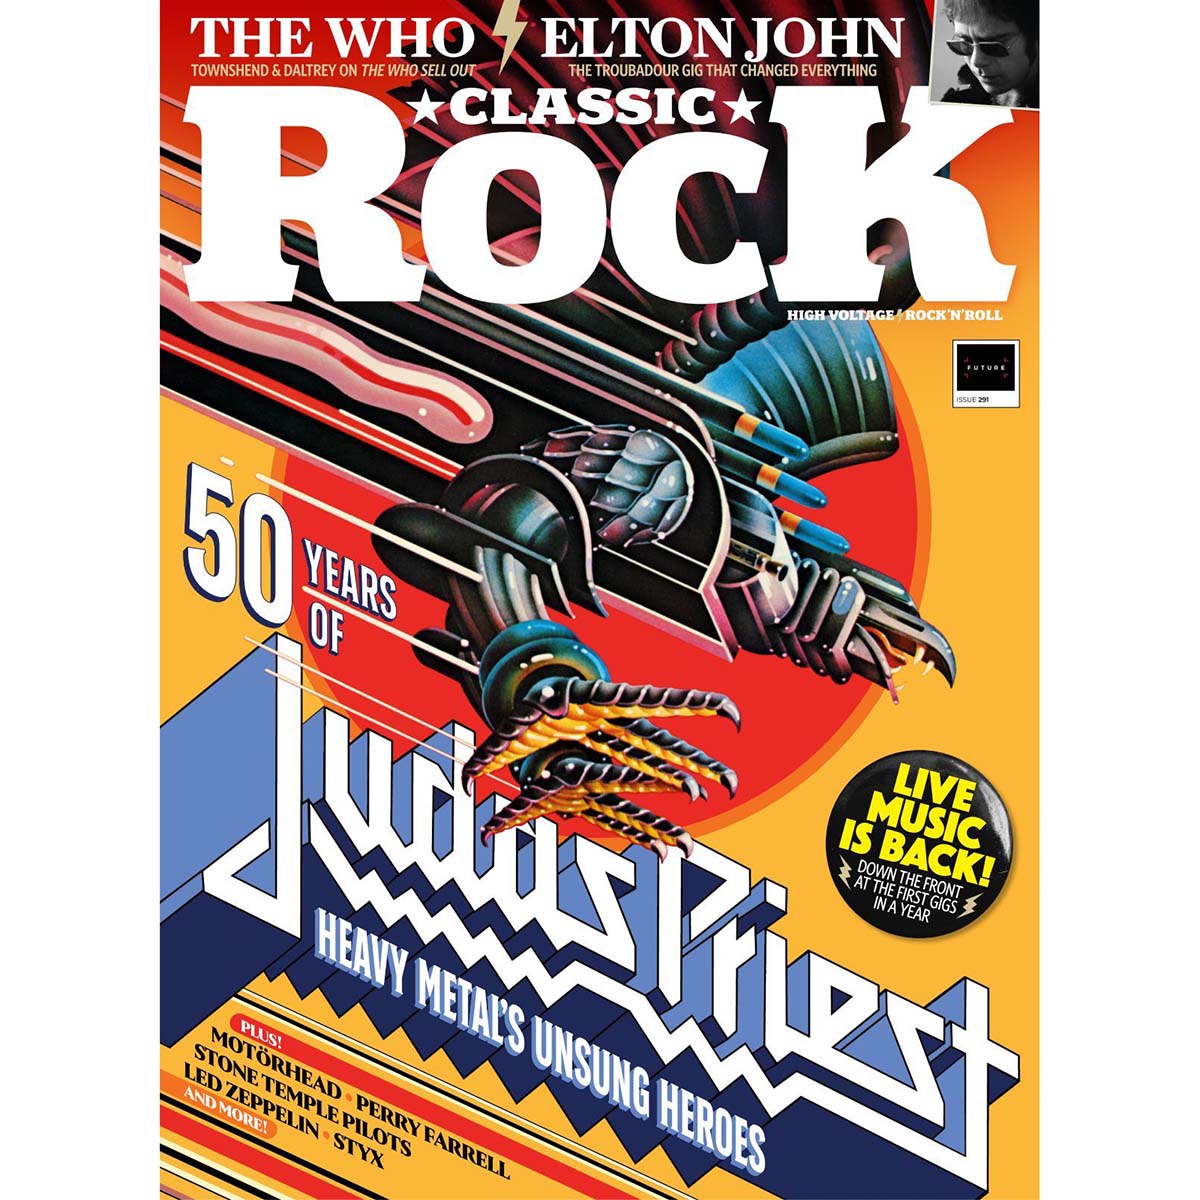 Classic Rock Issue 291 (August 2021)